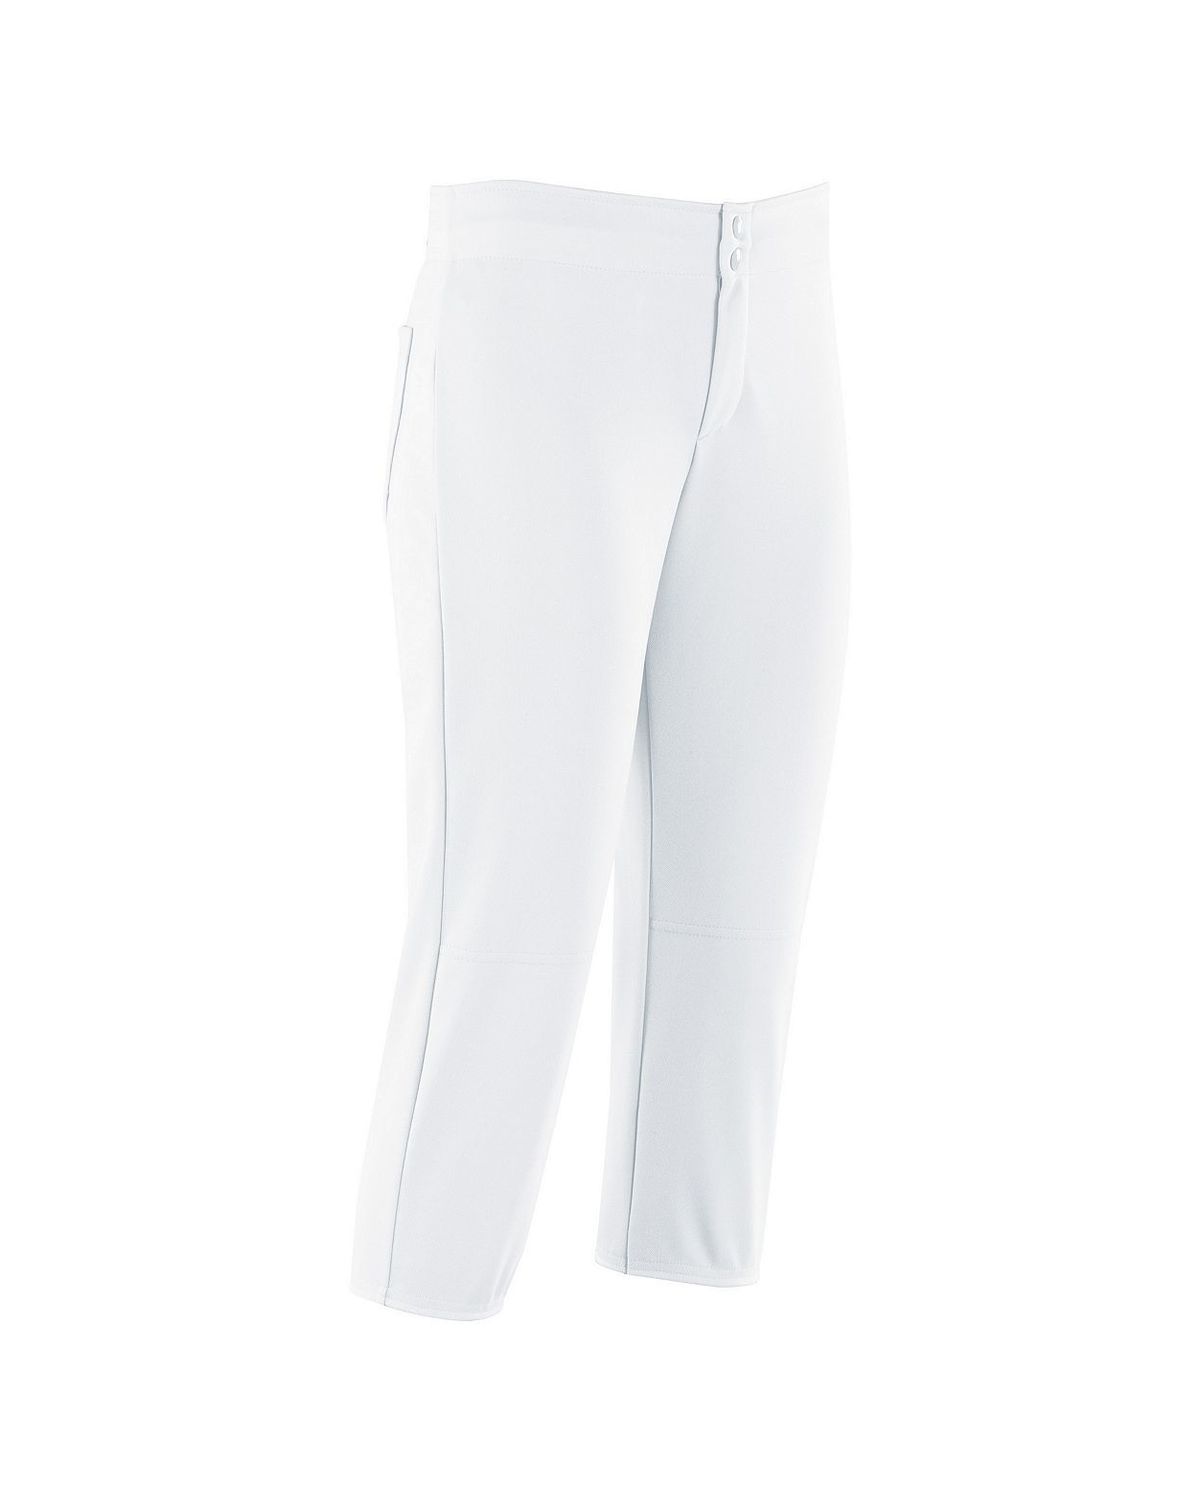 'High Five 315132-C Womens Unbelted Softball Pant'